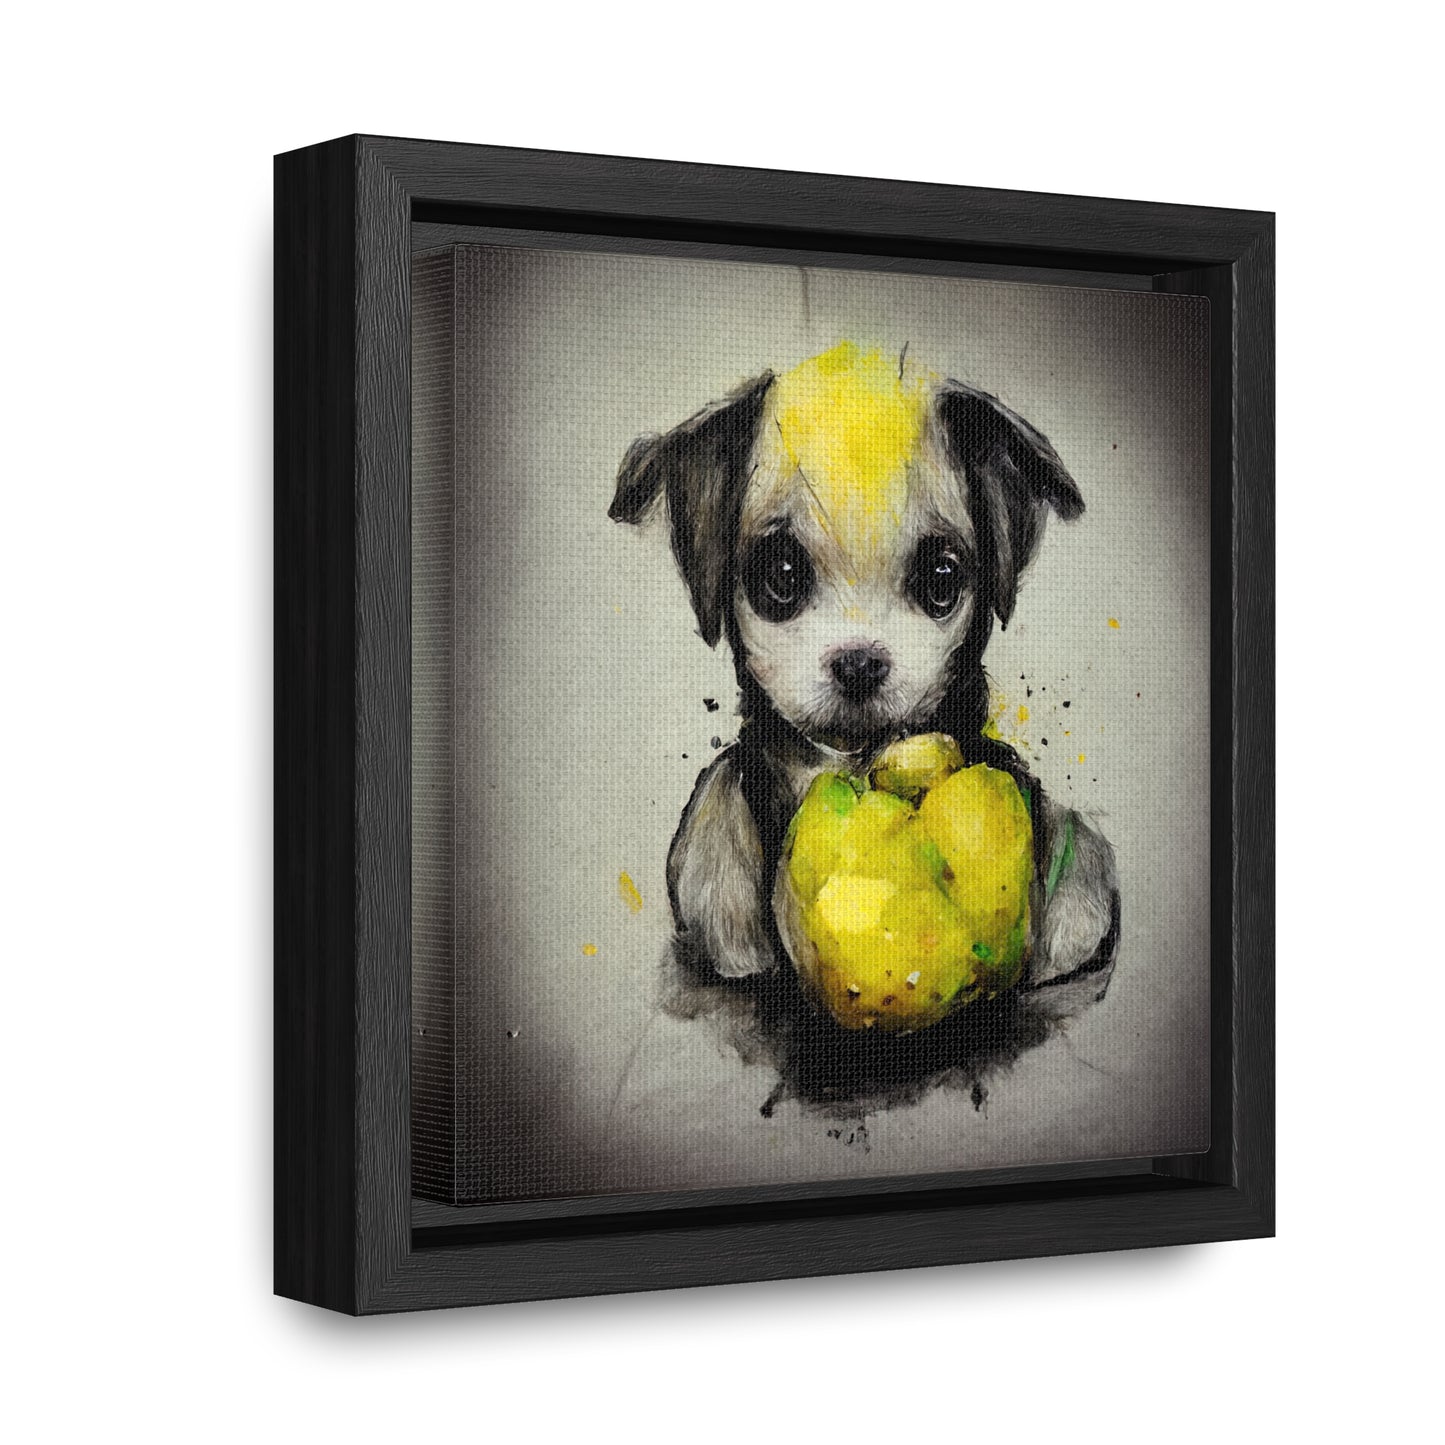 Dogs and Puppies 2, Valentinii, Gallery Canvas Wraps, Square Frame